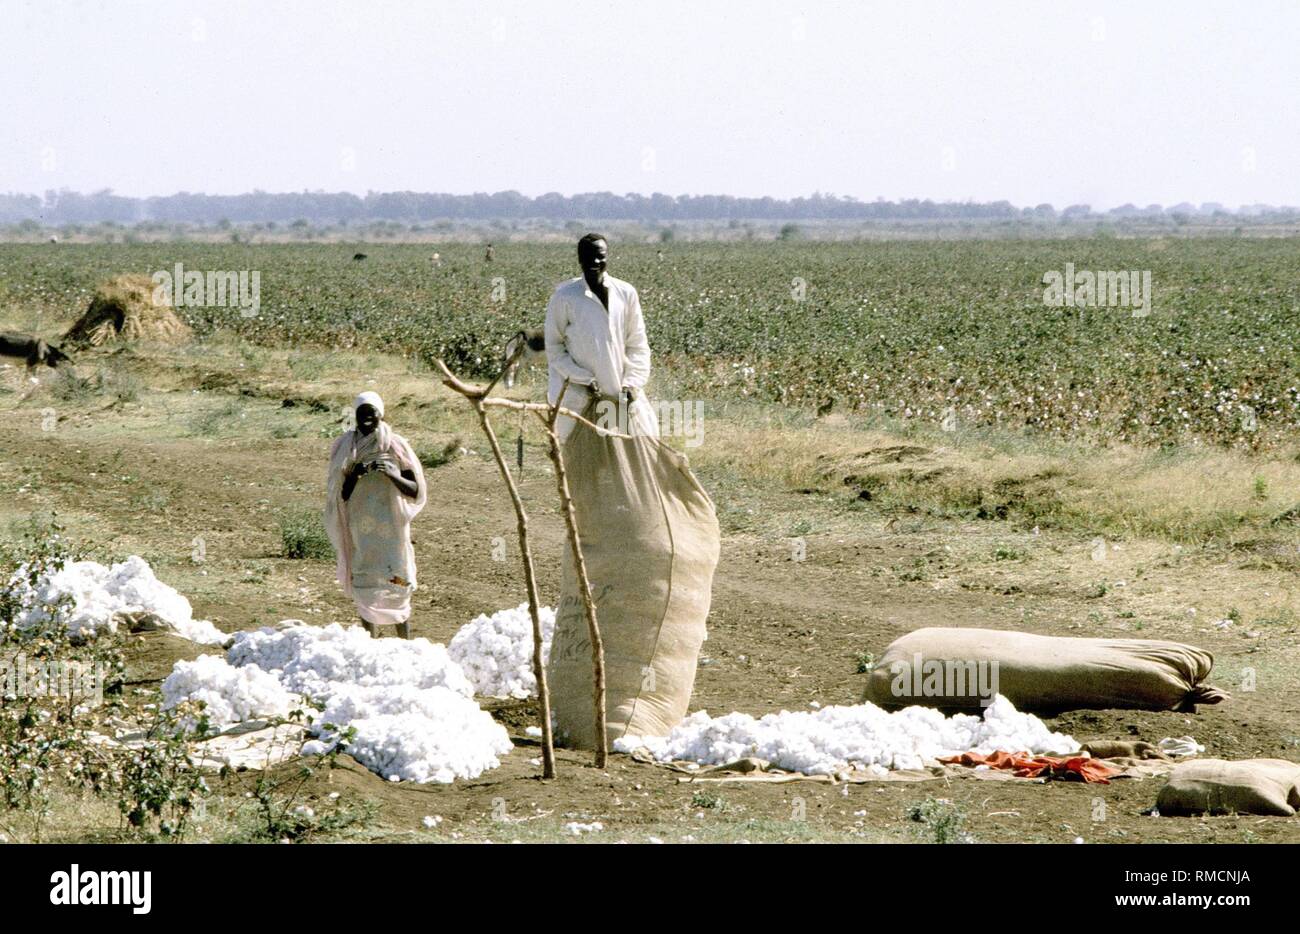 Sudanese men harvesting cotton on a plantation. The harvested cotton is packed in big sacks. Stock Photo